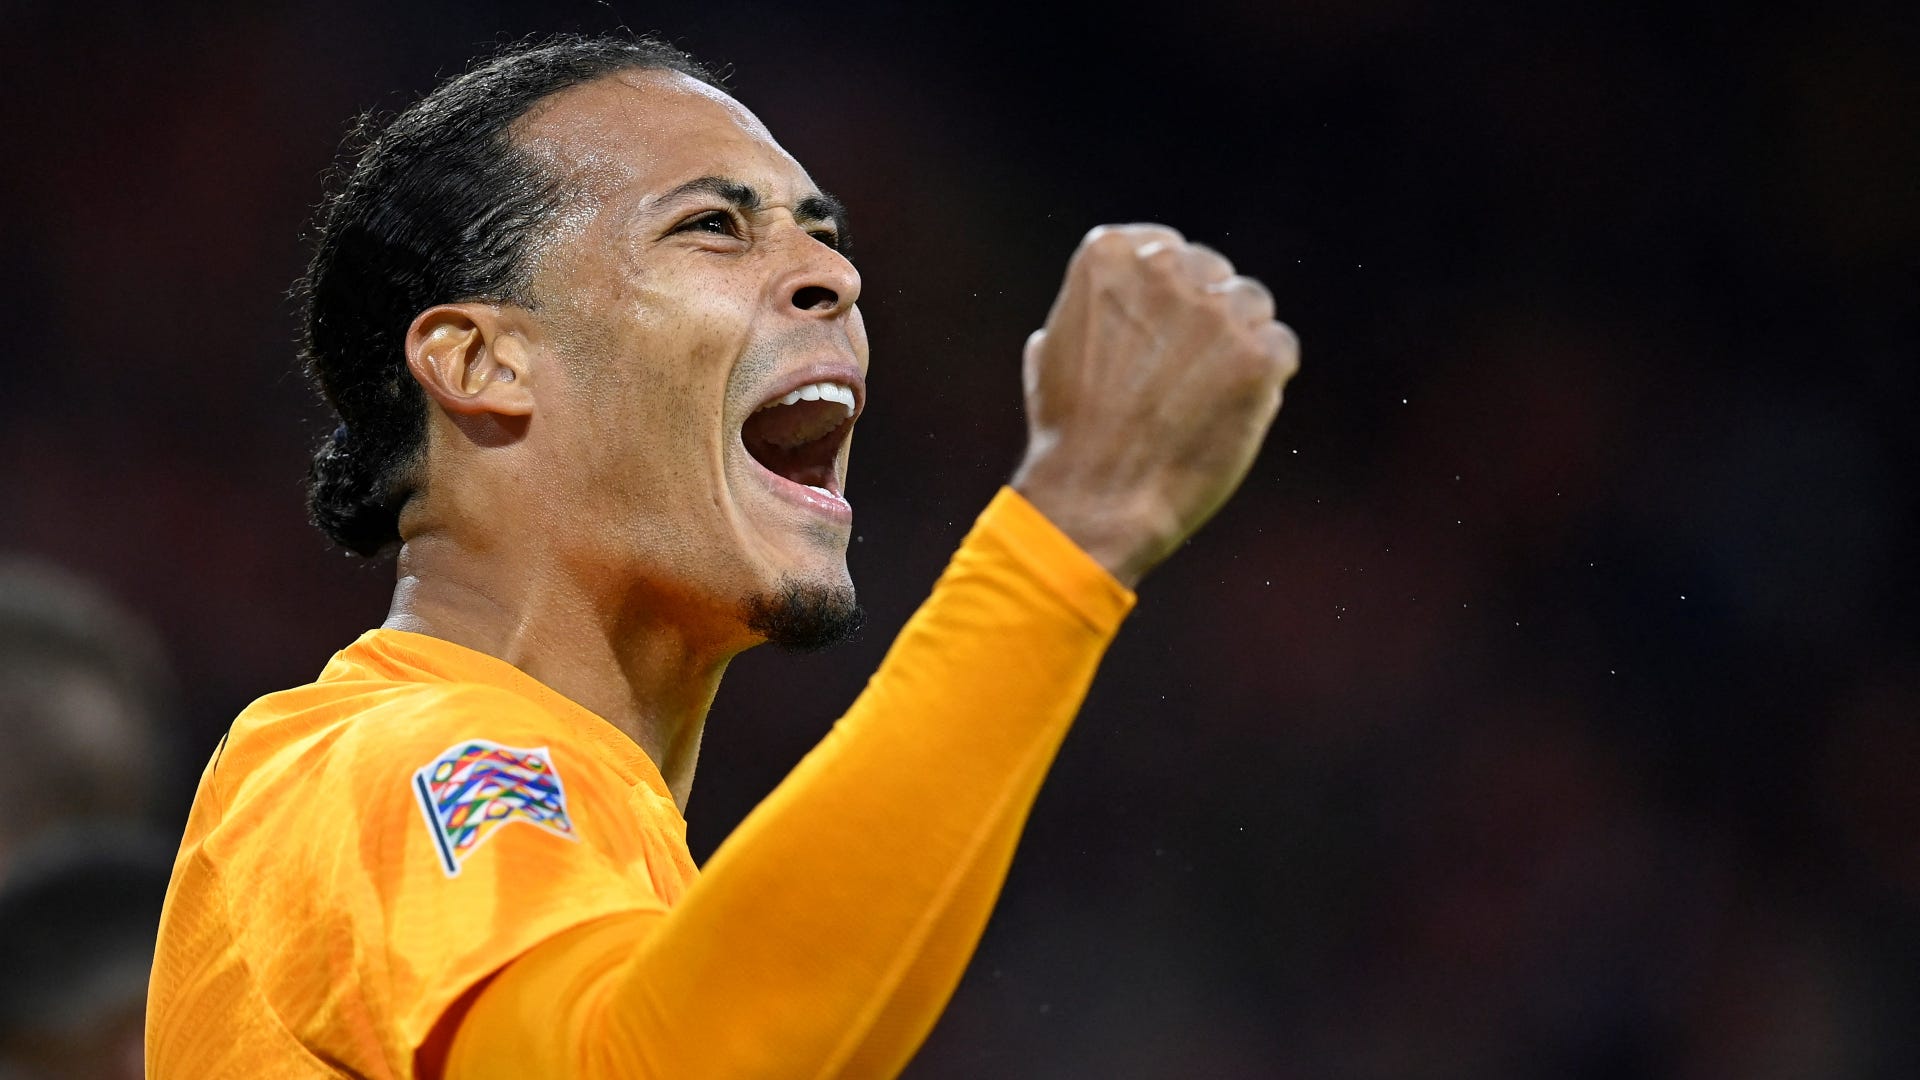 Van Dijk believes World Cup could be 'special' for the Netherlands following win over Belgium | Goal.com